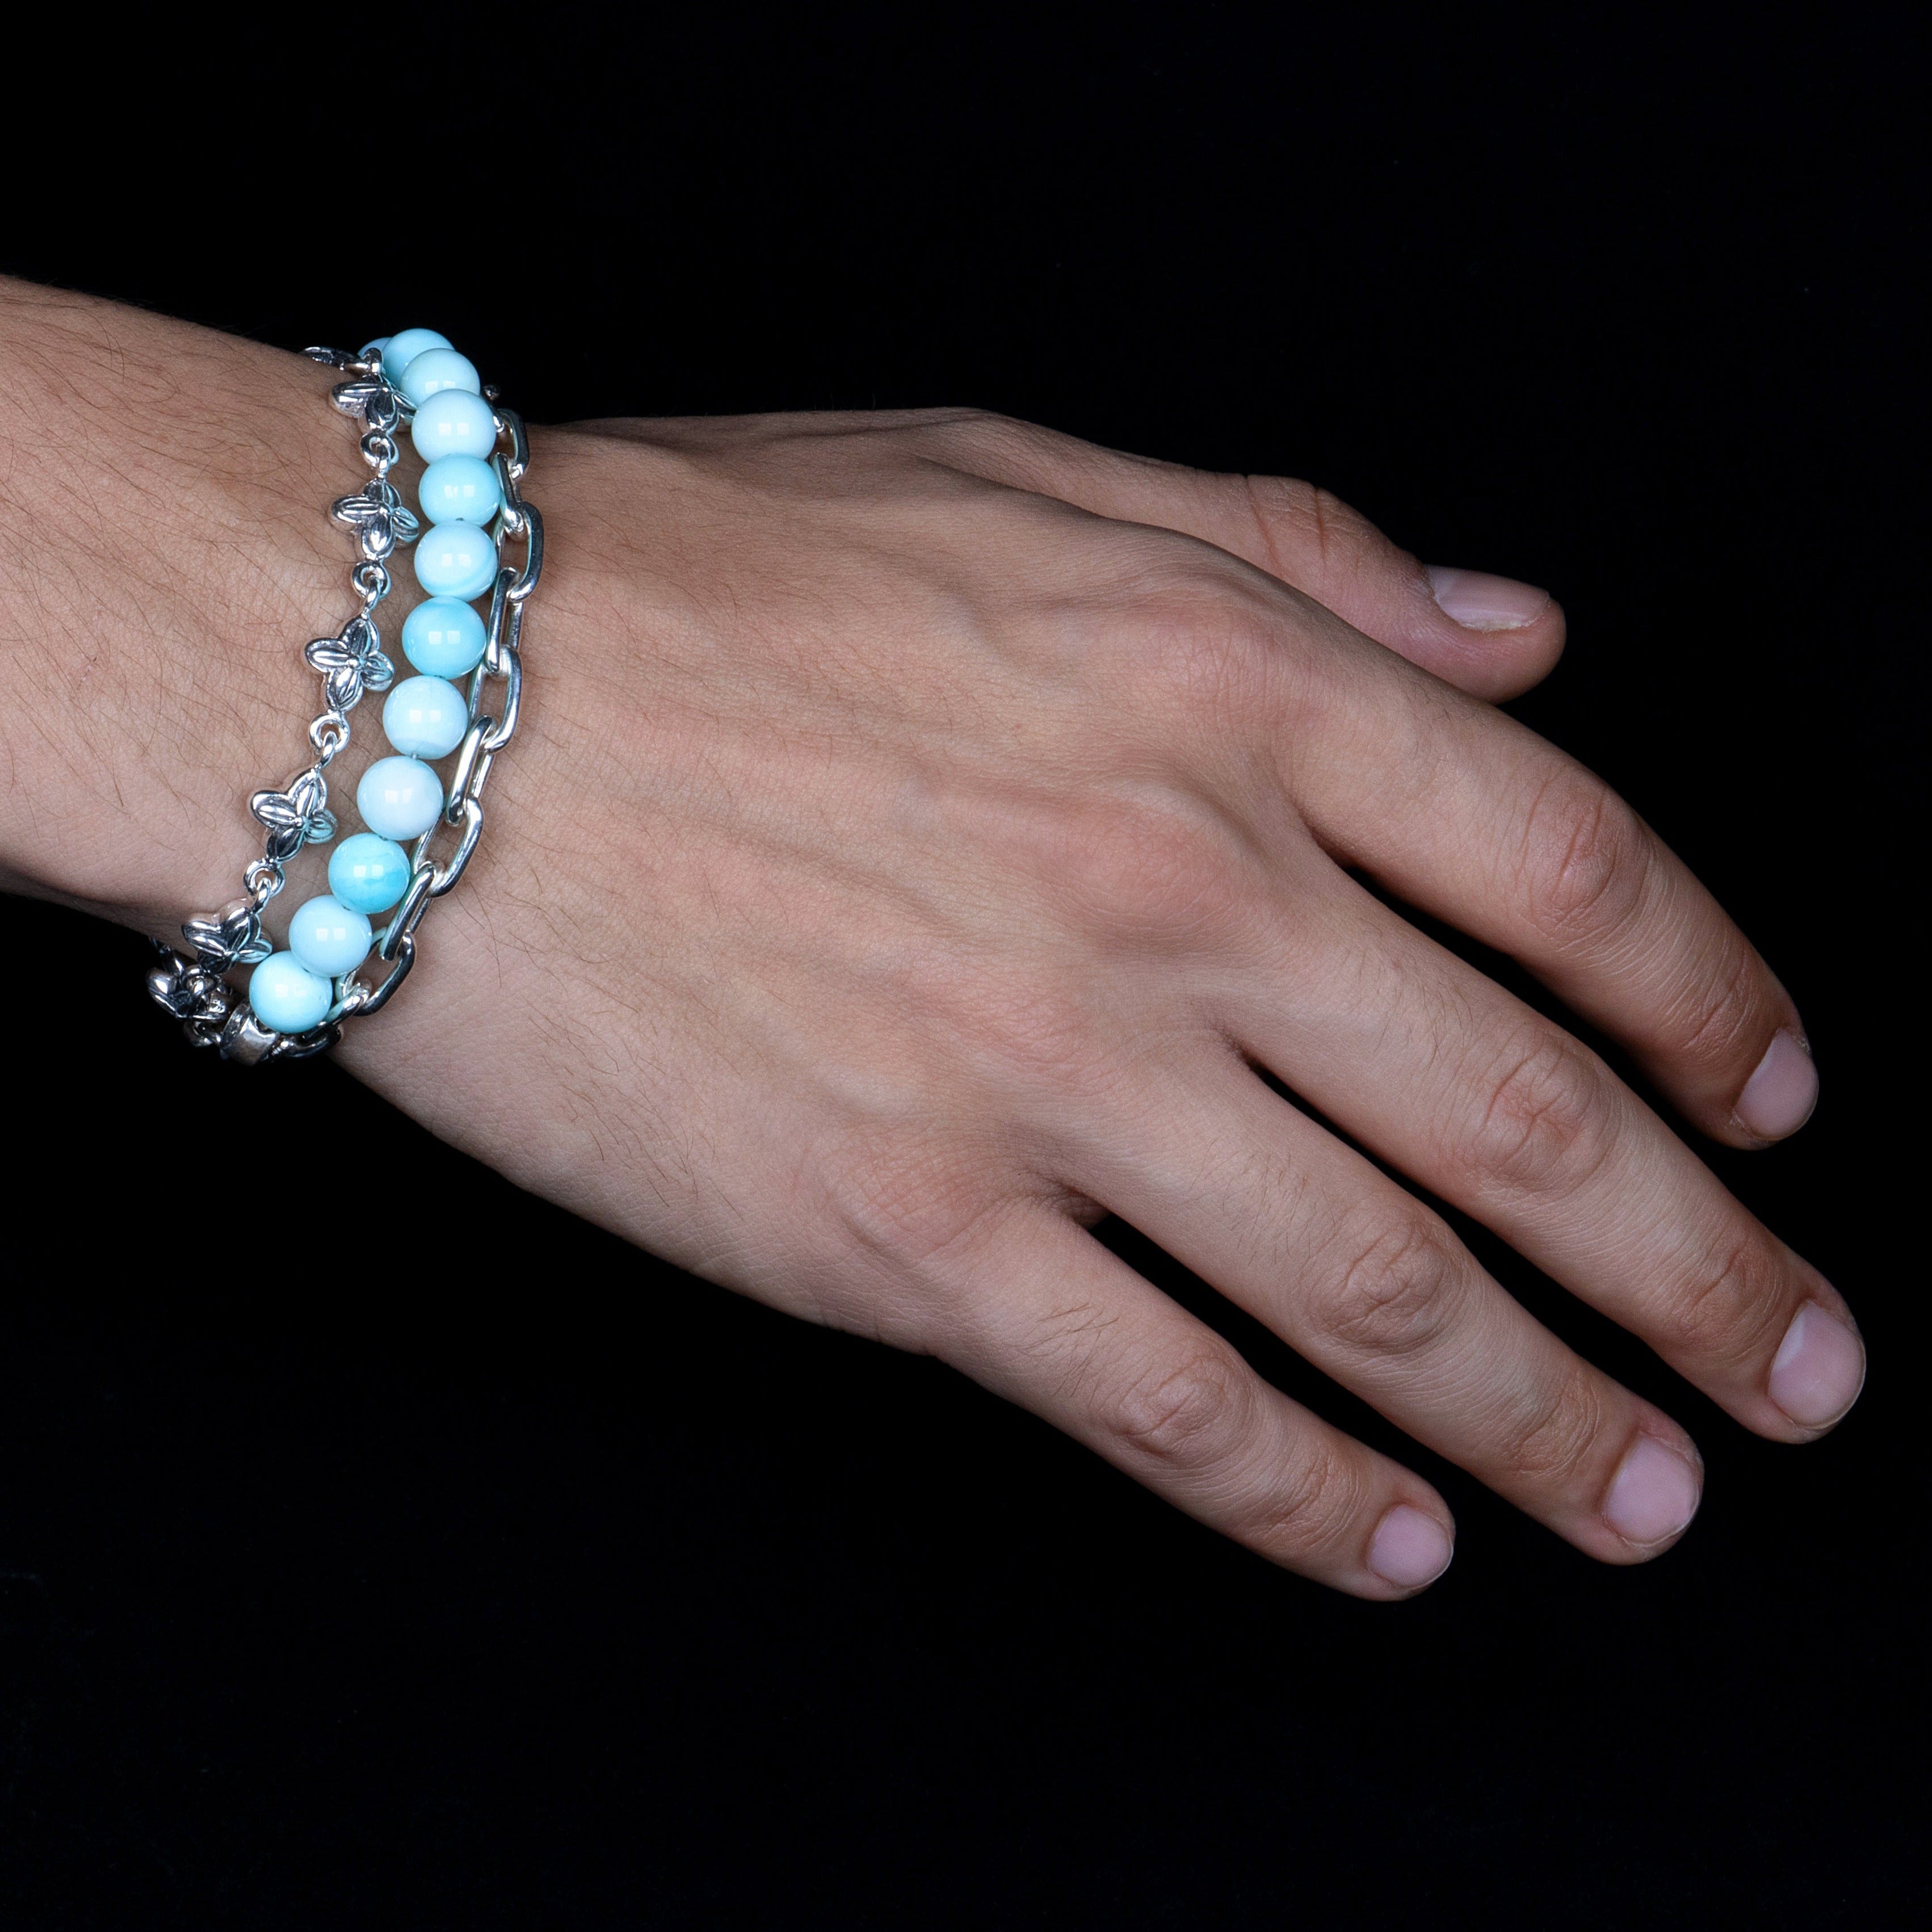 Circular Peruvian Opal beads on a stainless steel cable with Sterling silver T clasp. Shown on model.